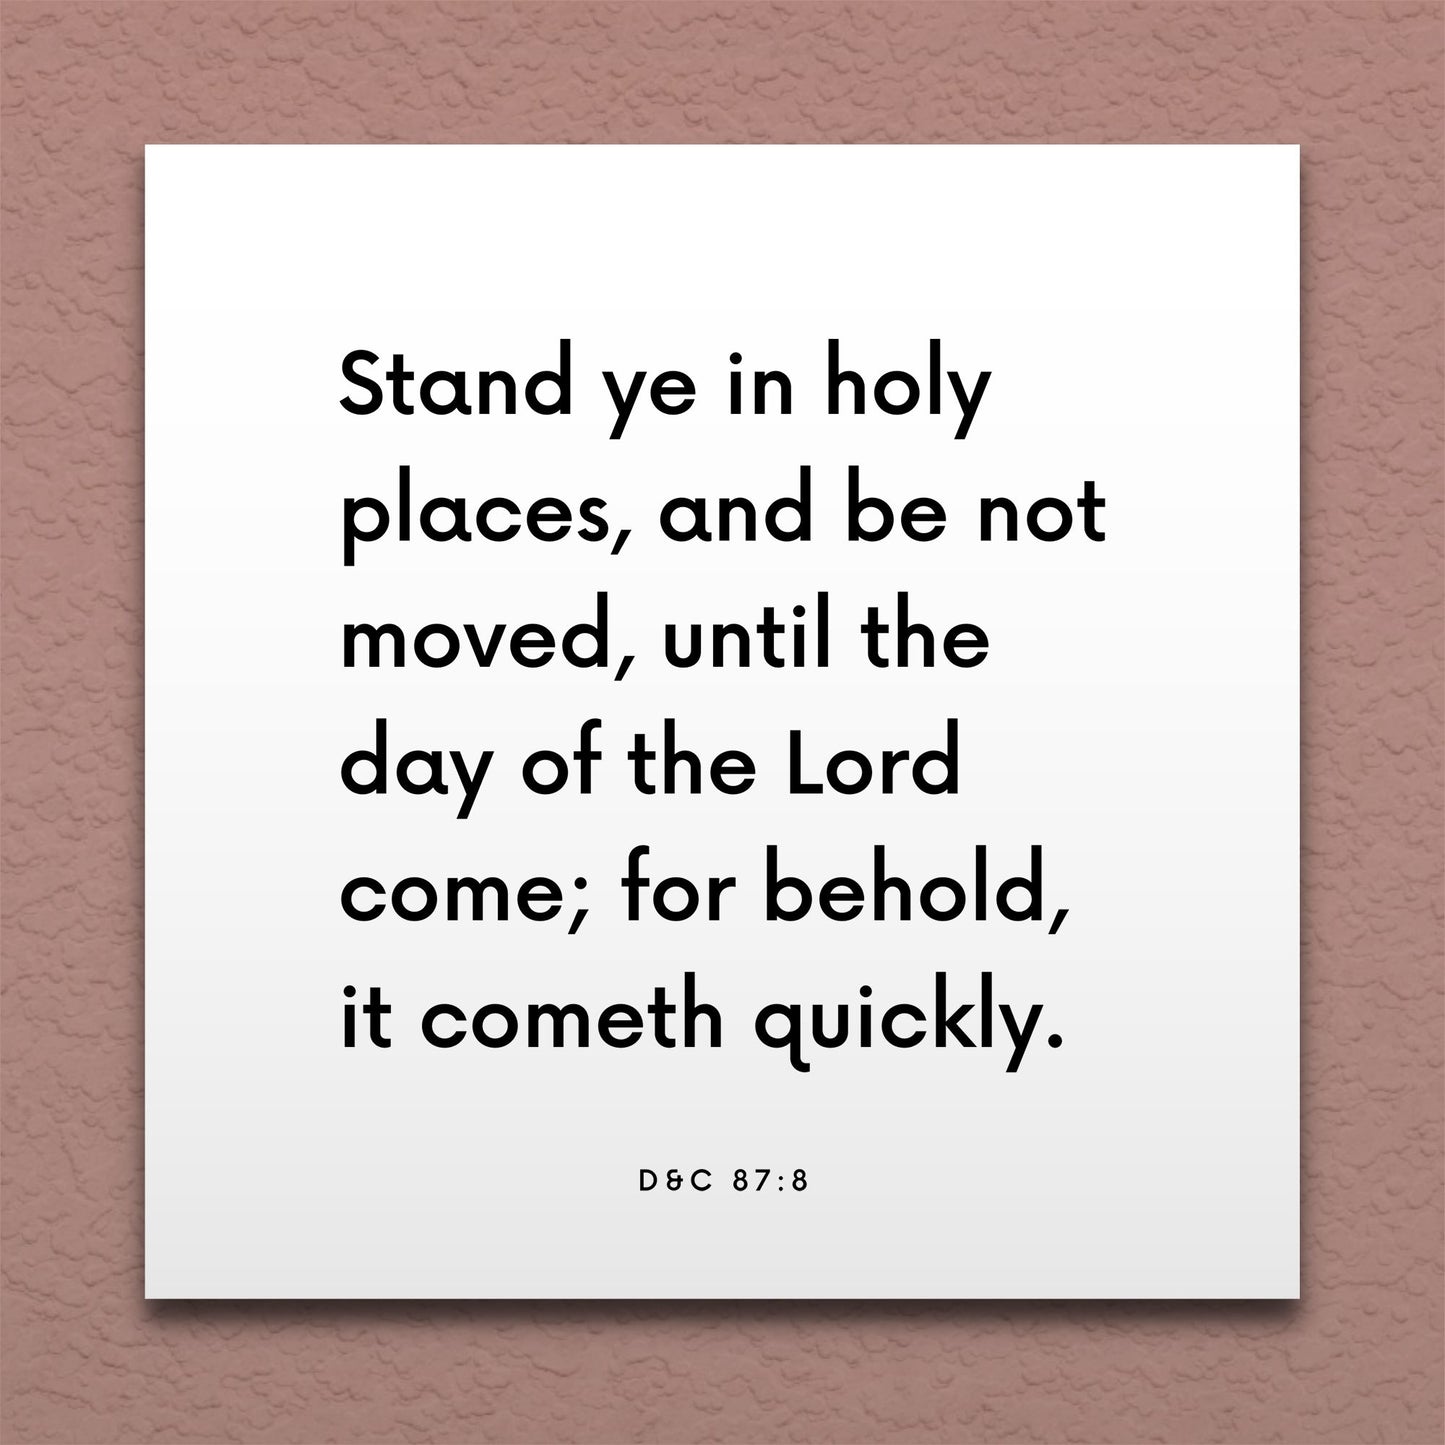 Wall-mounted scripture tile for D&C 87:8 - "Stand ye in holy places, and be not moved"